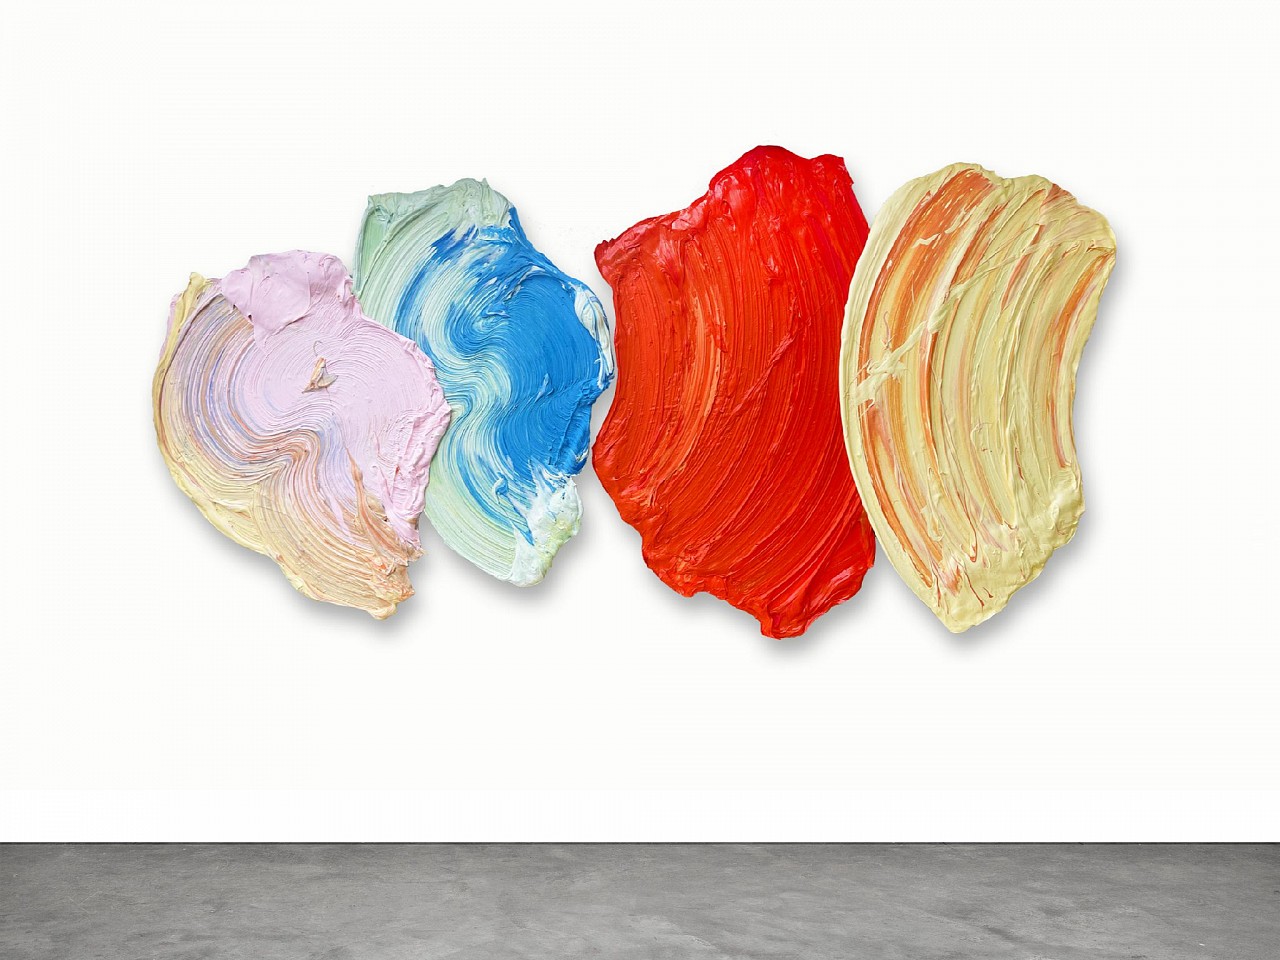 Donald Martiny, Wobe, 2022
polymer and pigment on aluminum, Pink/Blue 42 x 37 inches / orange/yellow 41 x 46 inches
MART00131